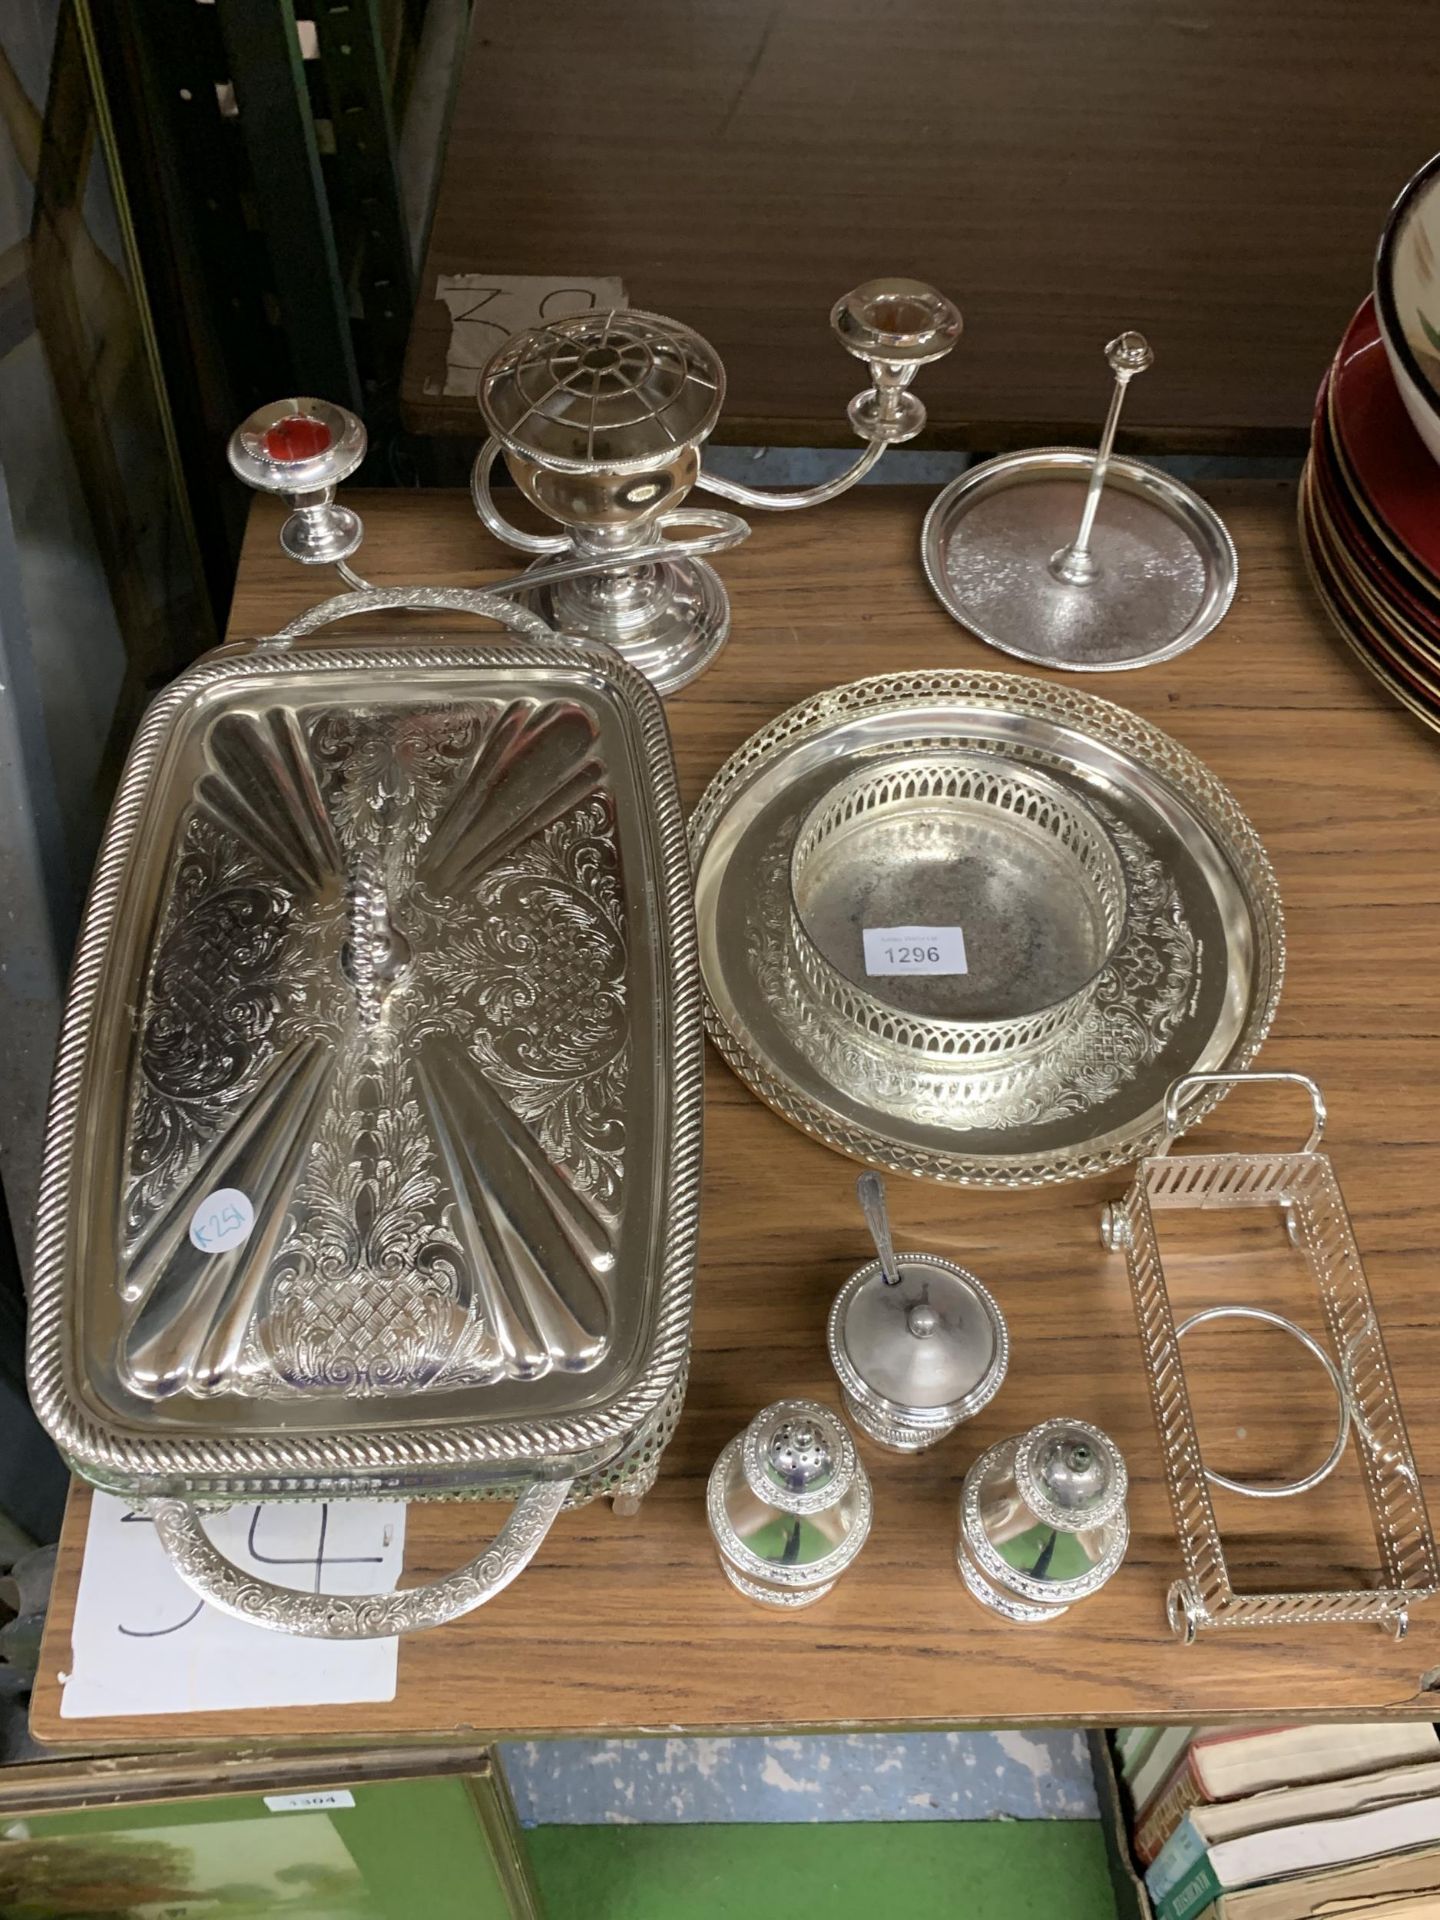 A QUANTITY OF SILVER PLATED ITEMS TO INCLUDE A SERVING DISH, CANDLEABRA, CRUET SET, TRAYS, ETC